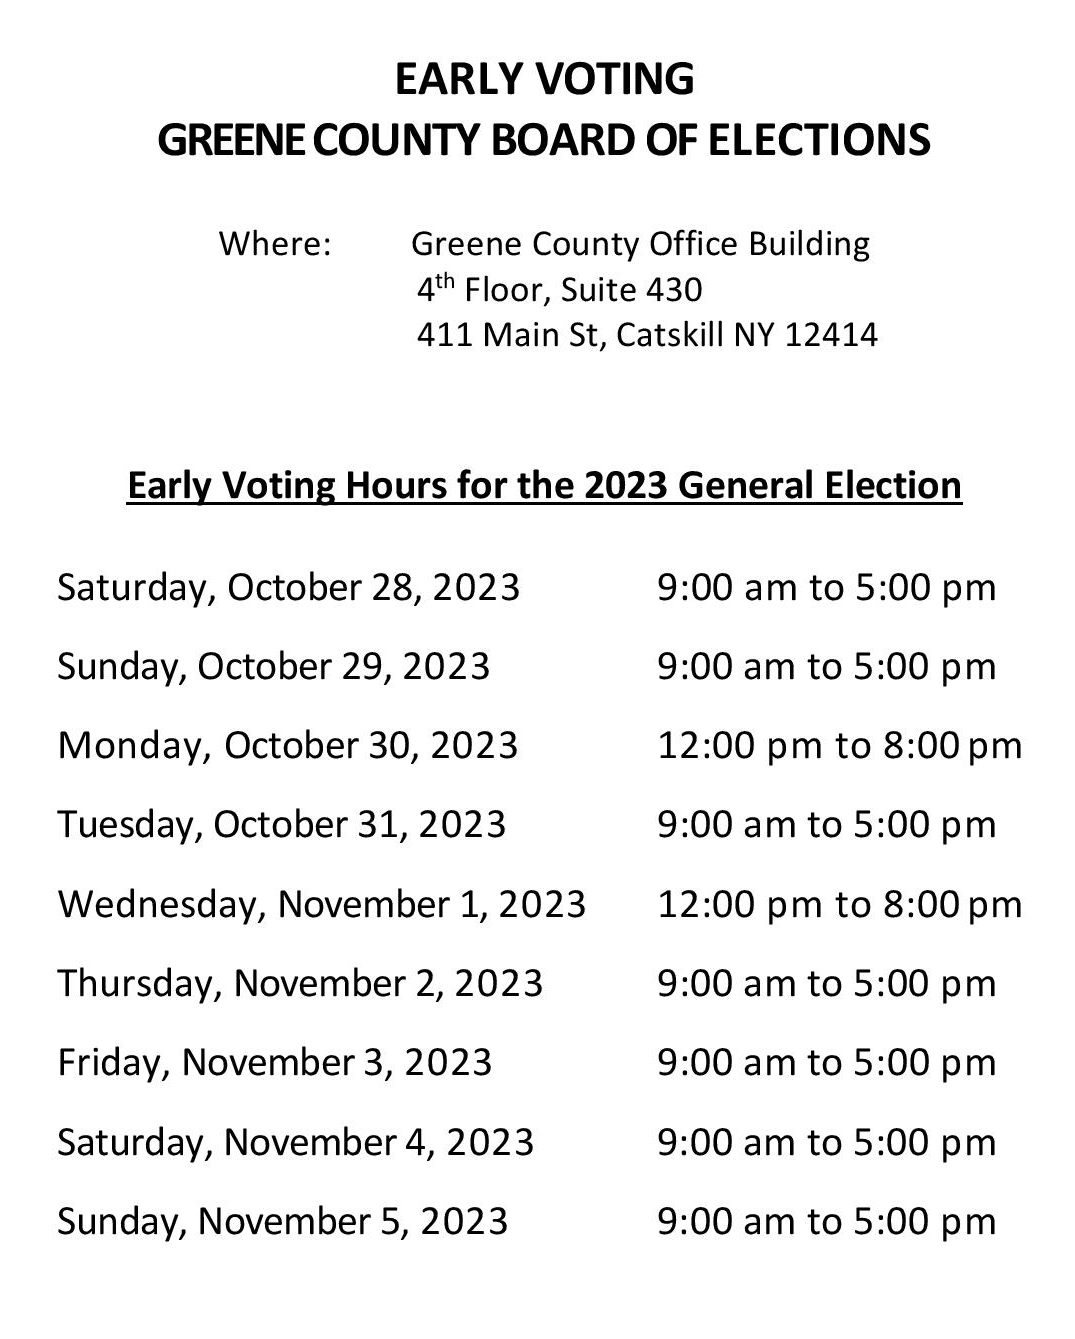 EARLY VOTING GREENE COUNTY BOARD OF ELECTIONS Where: Greene County Office Building 4th Floor, Suite 430 411 Main St., Catskill, NY 12414 EARLY VOTING HOURS FOR THE 2023 GENERAL ELECTION Saturday, October 28, 2023 9:00 am to 5:00 pm Sunday, October 29, 2023 9:00 am to 5:00 pm Monday, October 30, 2023 12:00 pm to 8:00 pm Tuesday, October 31, 2023 9:00 am to 5:00 pm Wednesday, November 1, 2023 12:00 pm to 8 pm Thursday, November 2, 2023 9:00 am to 5:00 pm Friday, November 3, 2023 9:00 am to 5:00 pm Saturday, November 4, 2023 9:00 am to 5:00 pm Sunday, November 5, 2023 9:00 am to 5:00 pm